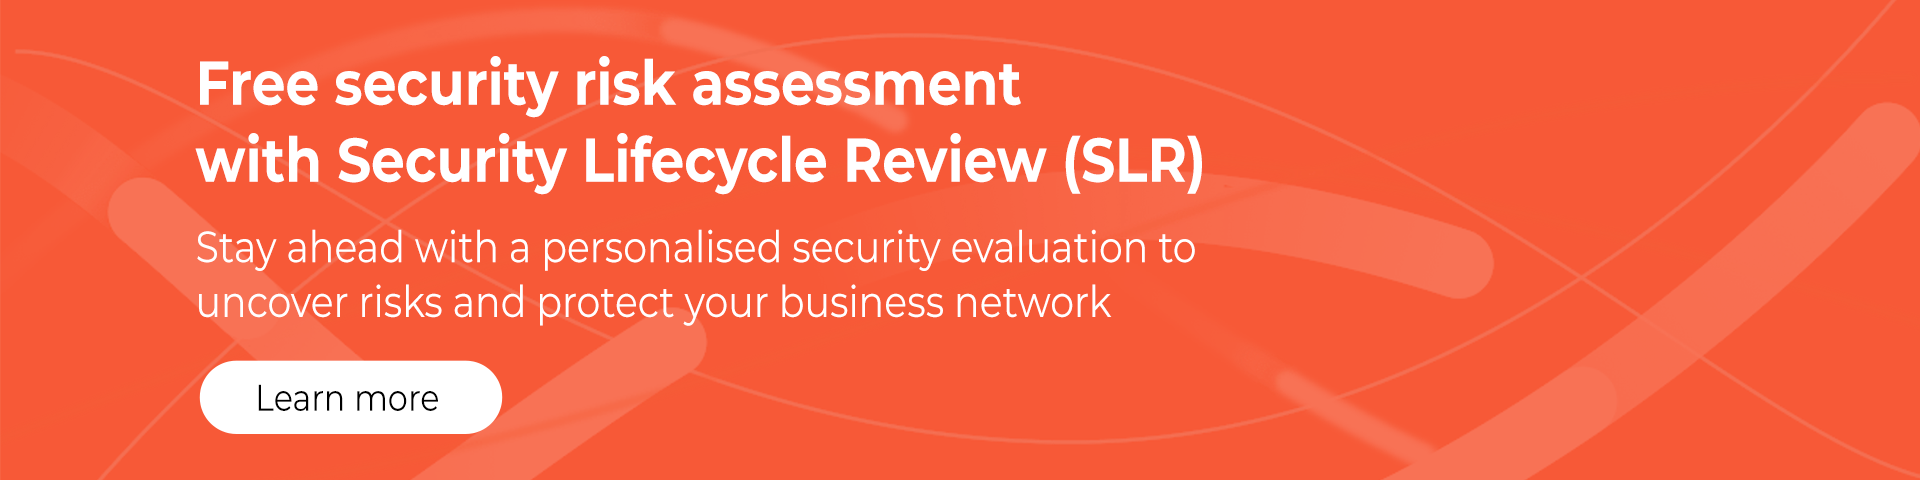 Palo Alto - Free Security Risk Assessment with Security Lifecycle Review